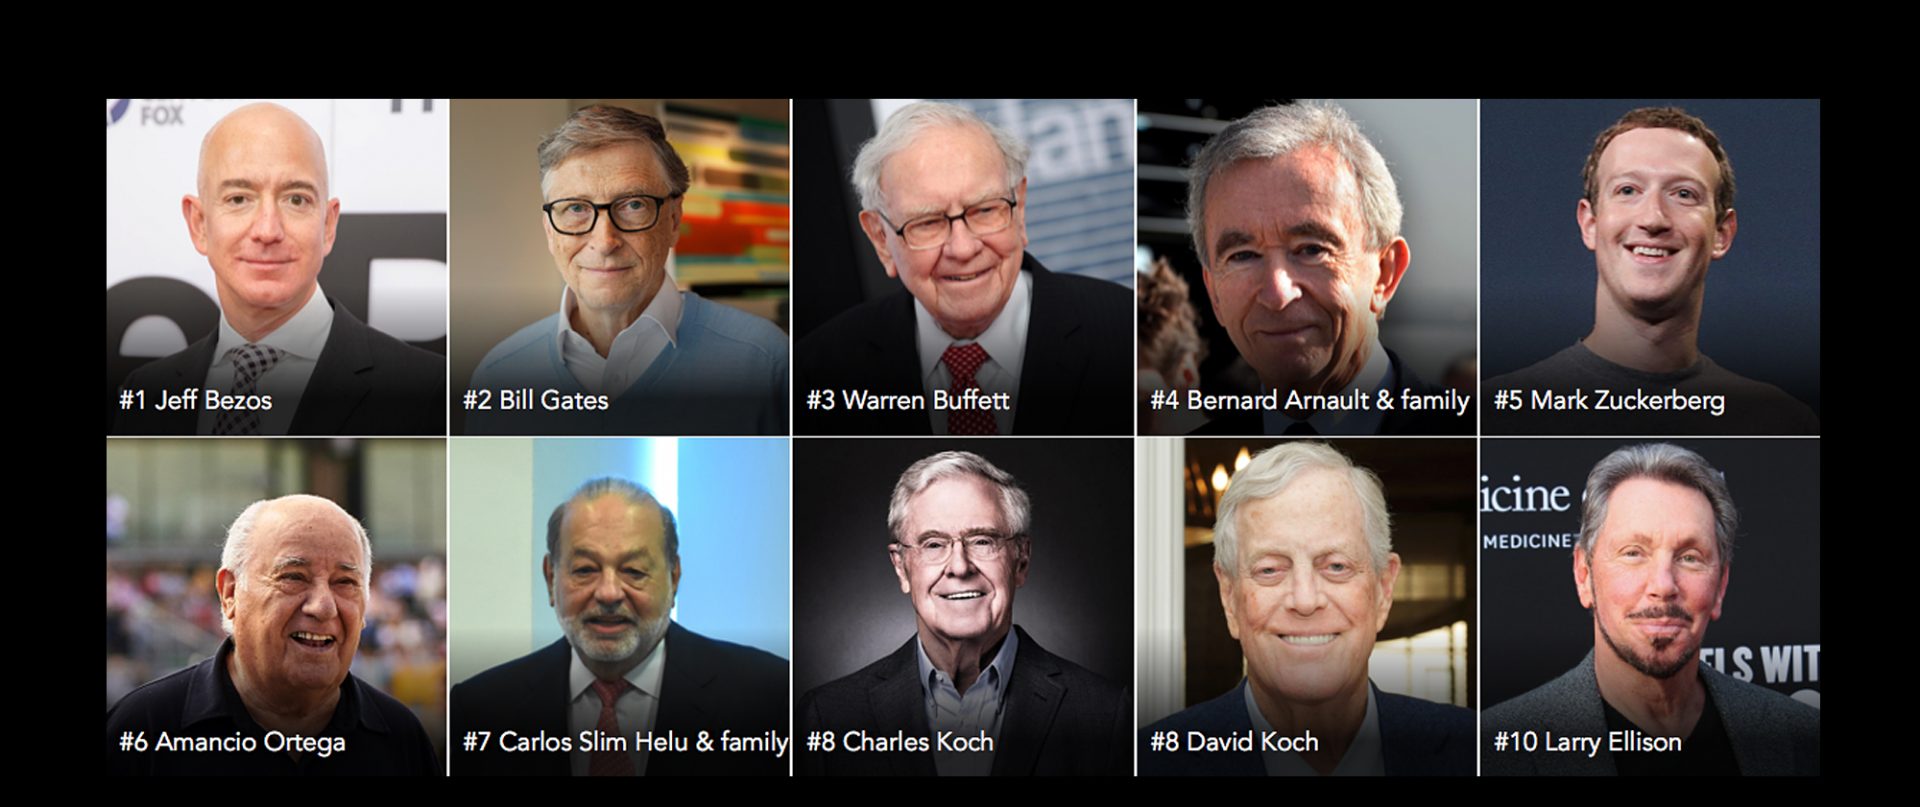 Forbes 400 List